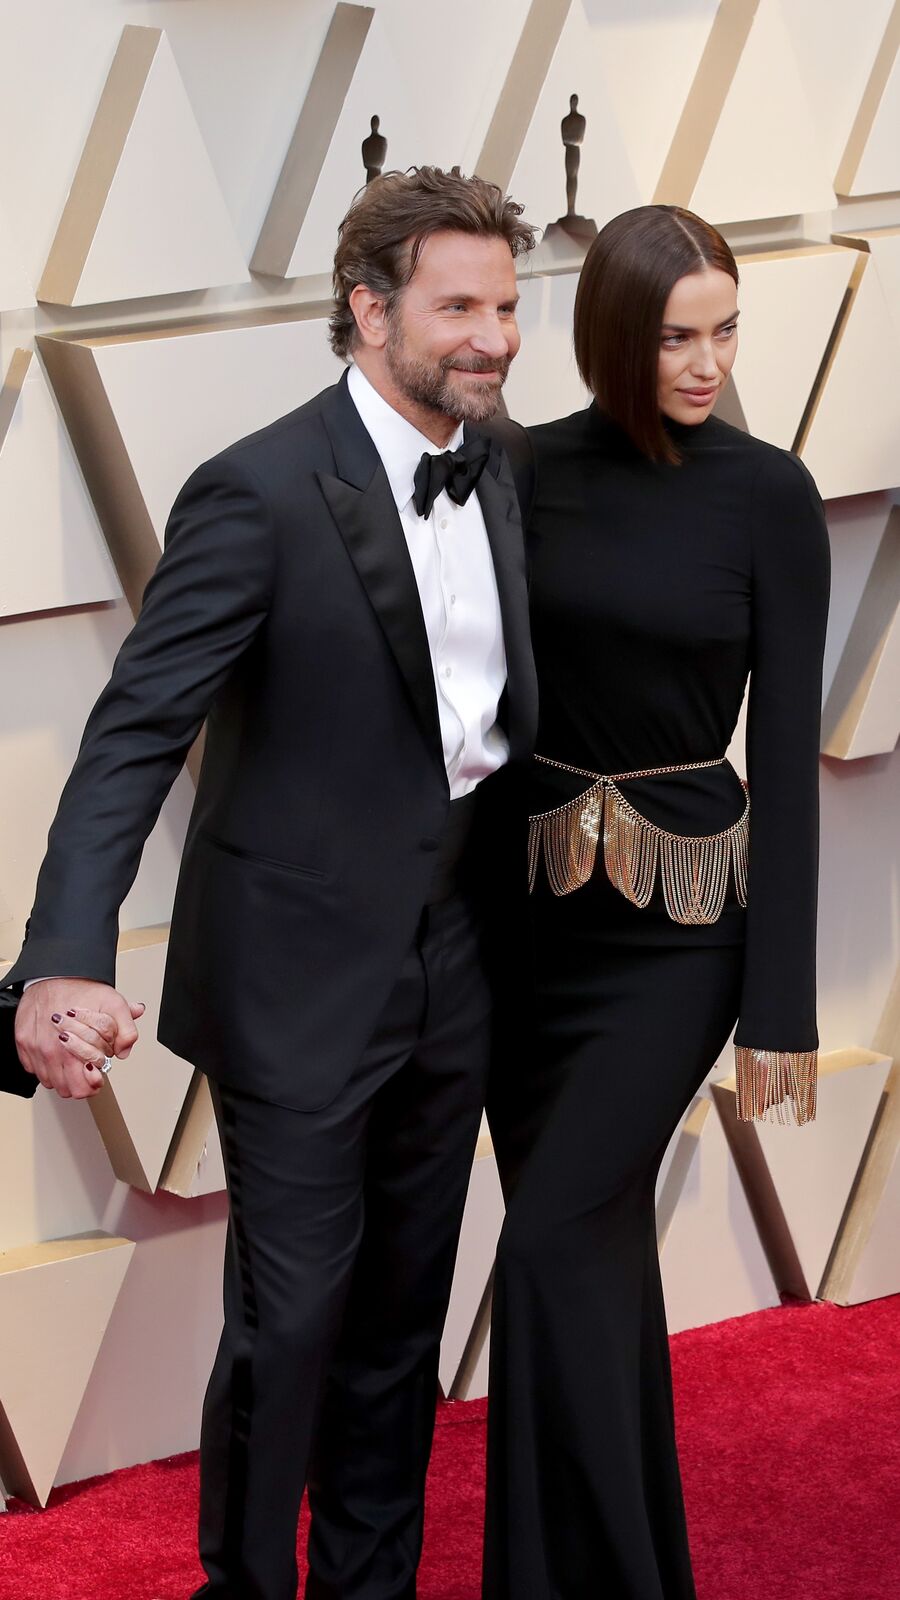  Bradley Cooper and Irina Shayk attends the 91st Annual Academy Awards at Hollywood and Highland on February 24, 2019 in Hollywood, California | Photo: Getty Images